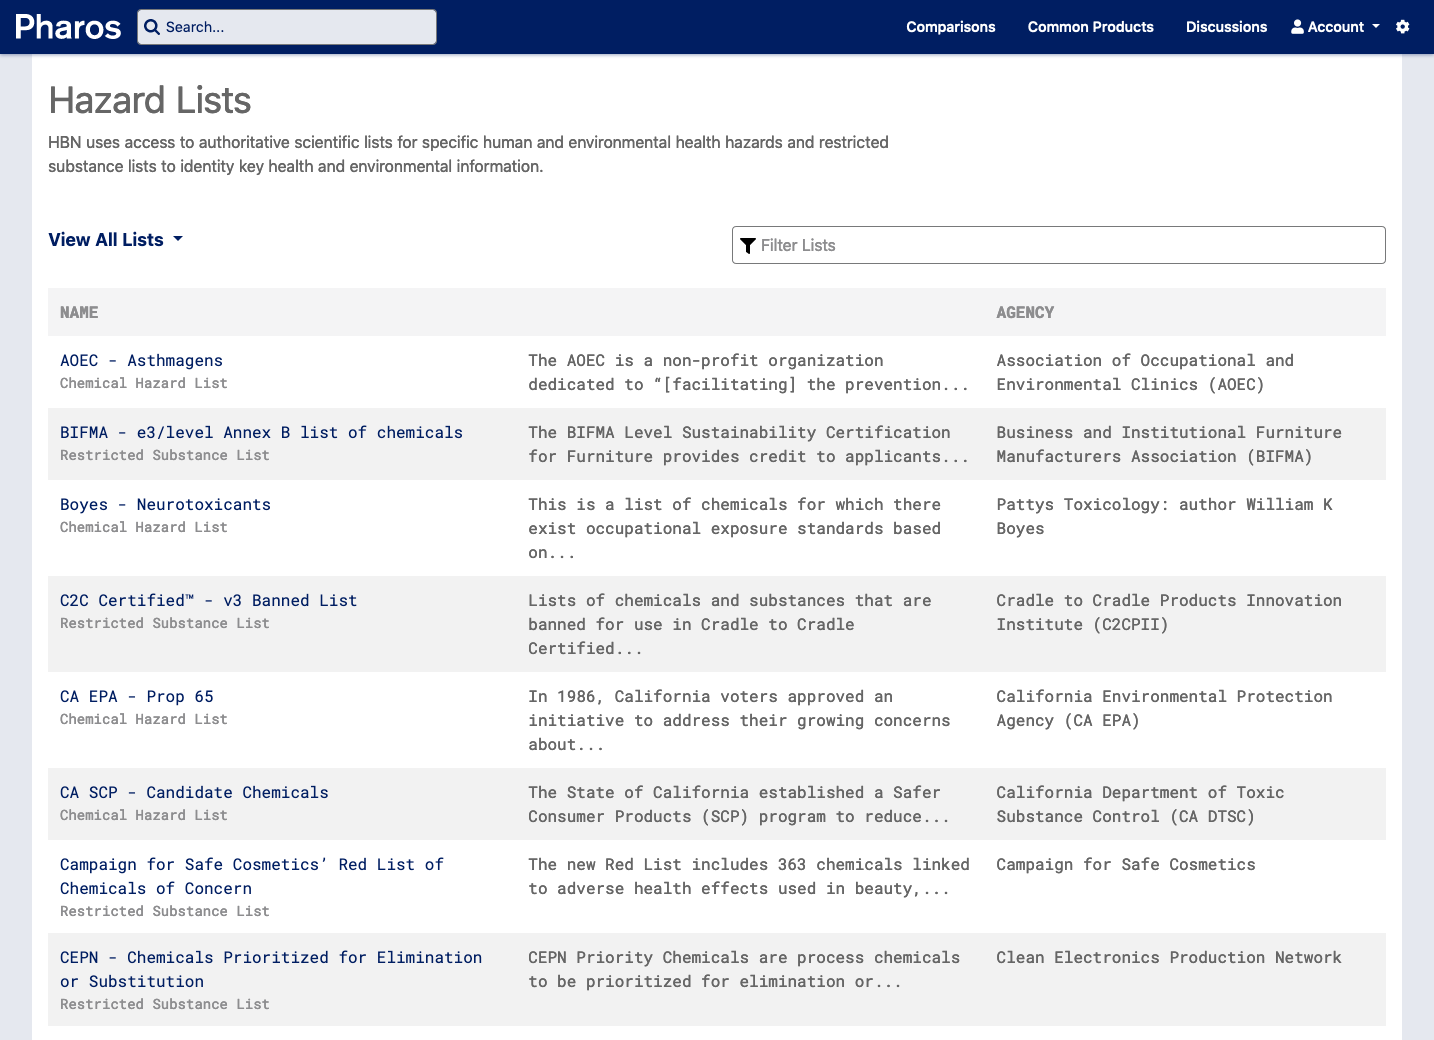 Preview screenshot of Hazard List view in Pharos. This view shows a searchable table of hazard lists, with links to view more information about each list.